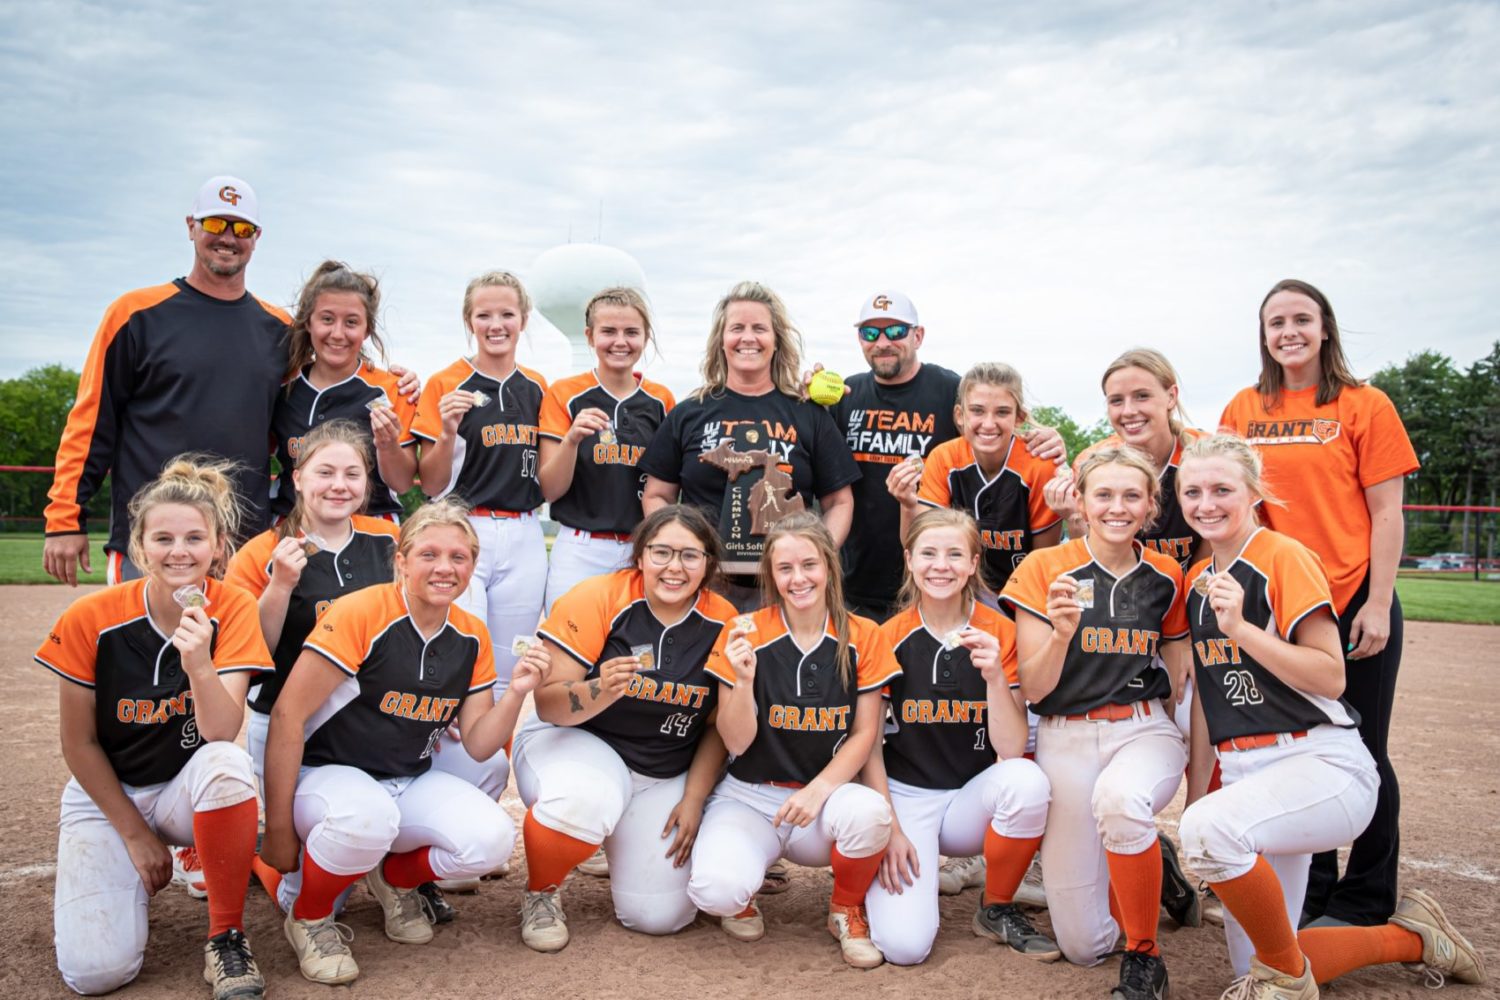 Grant manages just two hits, falls to Escanaba 8-0 in Division 2 softball regionals